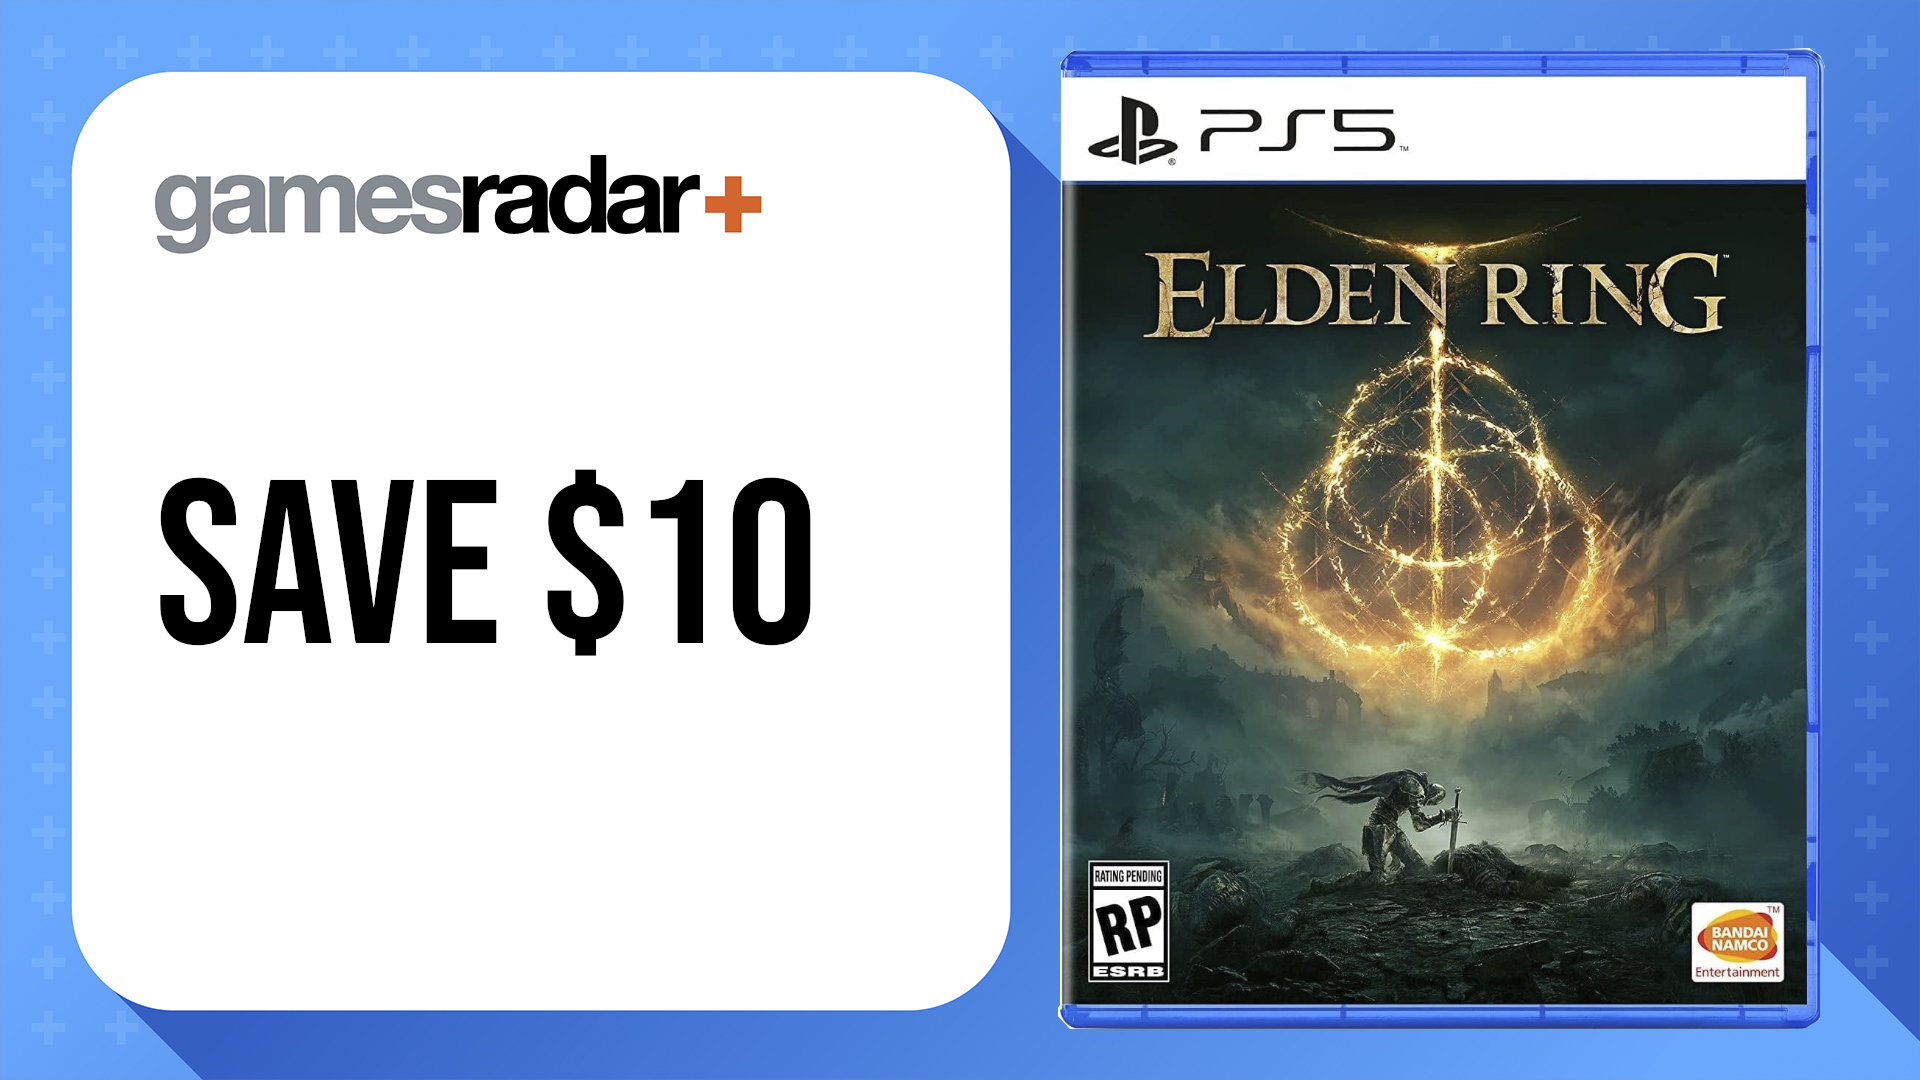 Amazon Prime Day PS5 sales with Elden Ring box